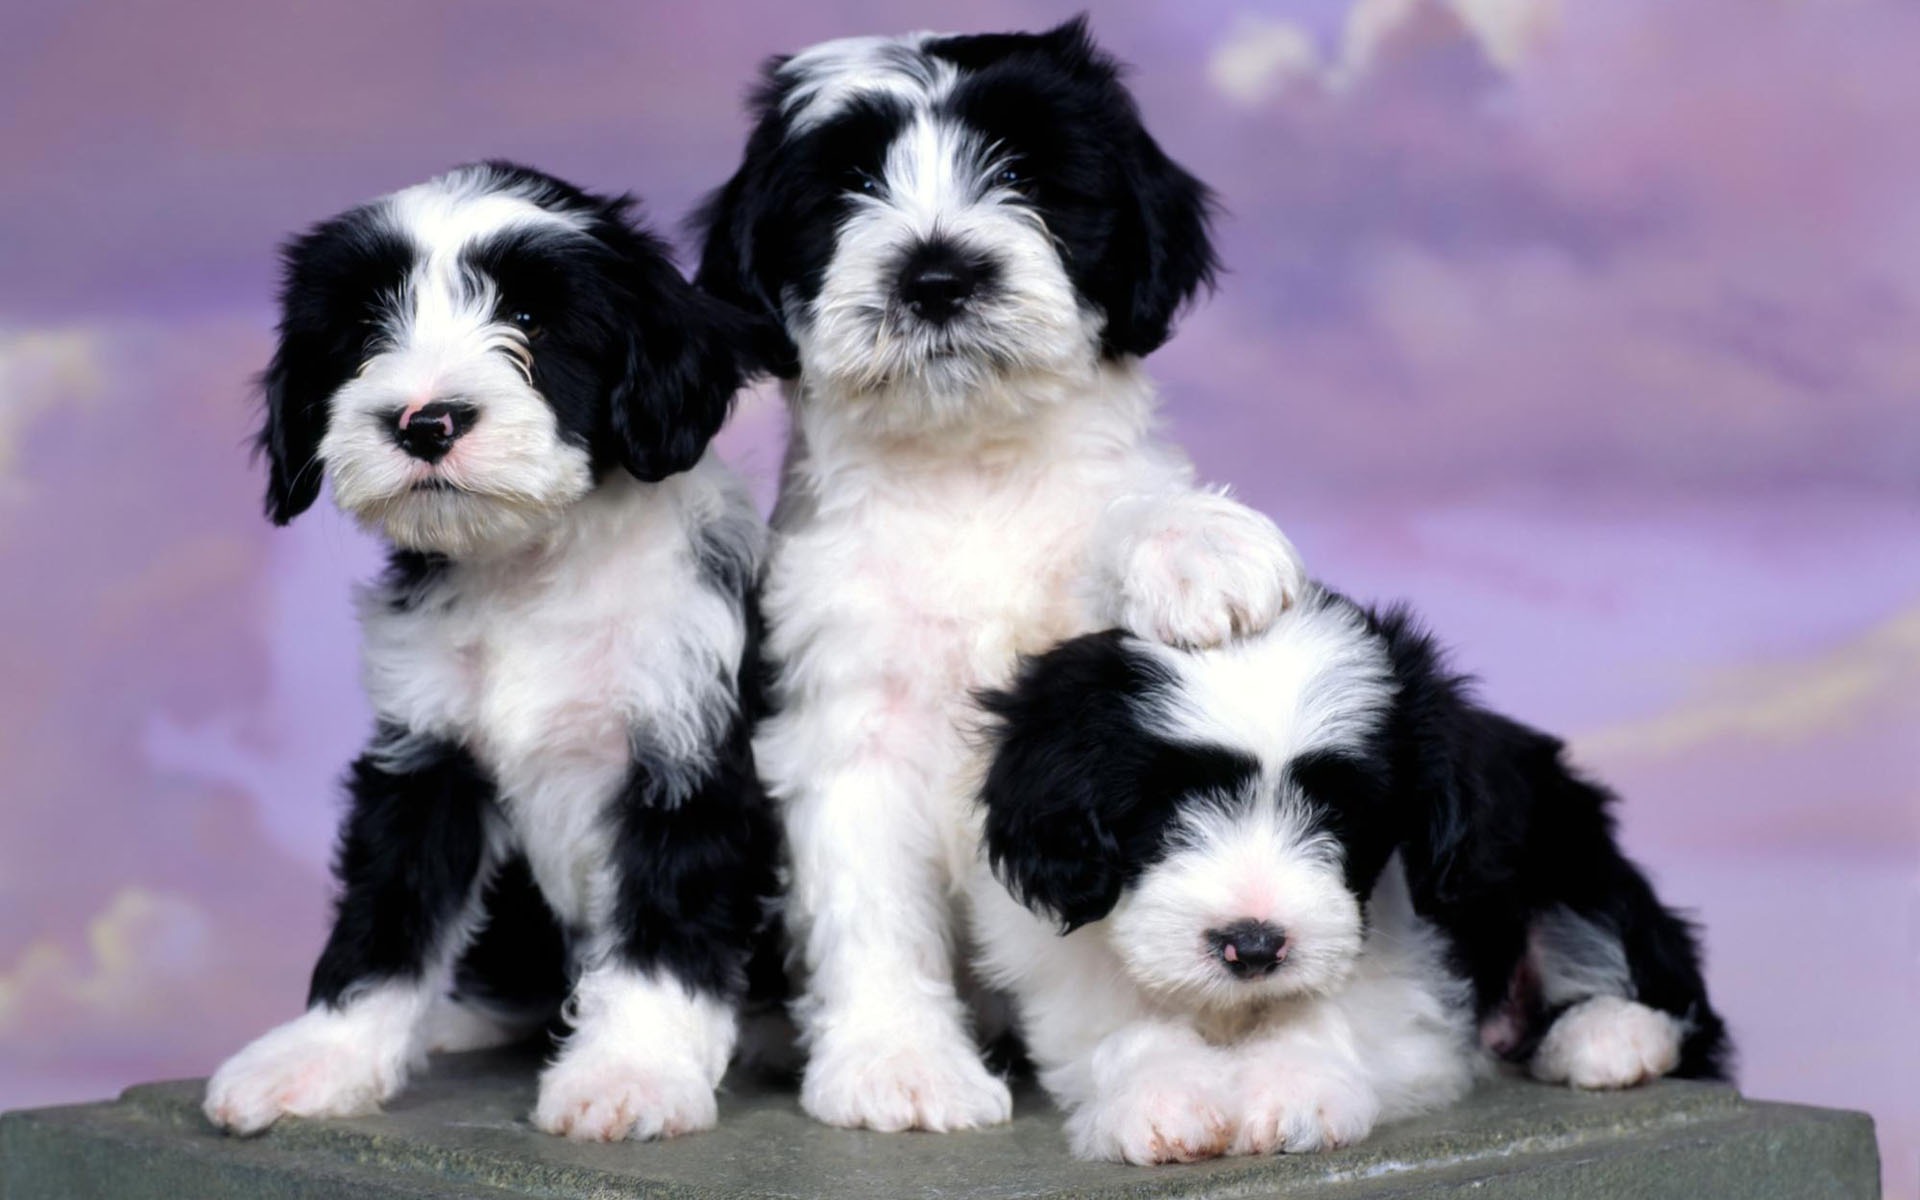 Puppy Photo HD wallpapers (1) #19 - 1920x1200